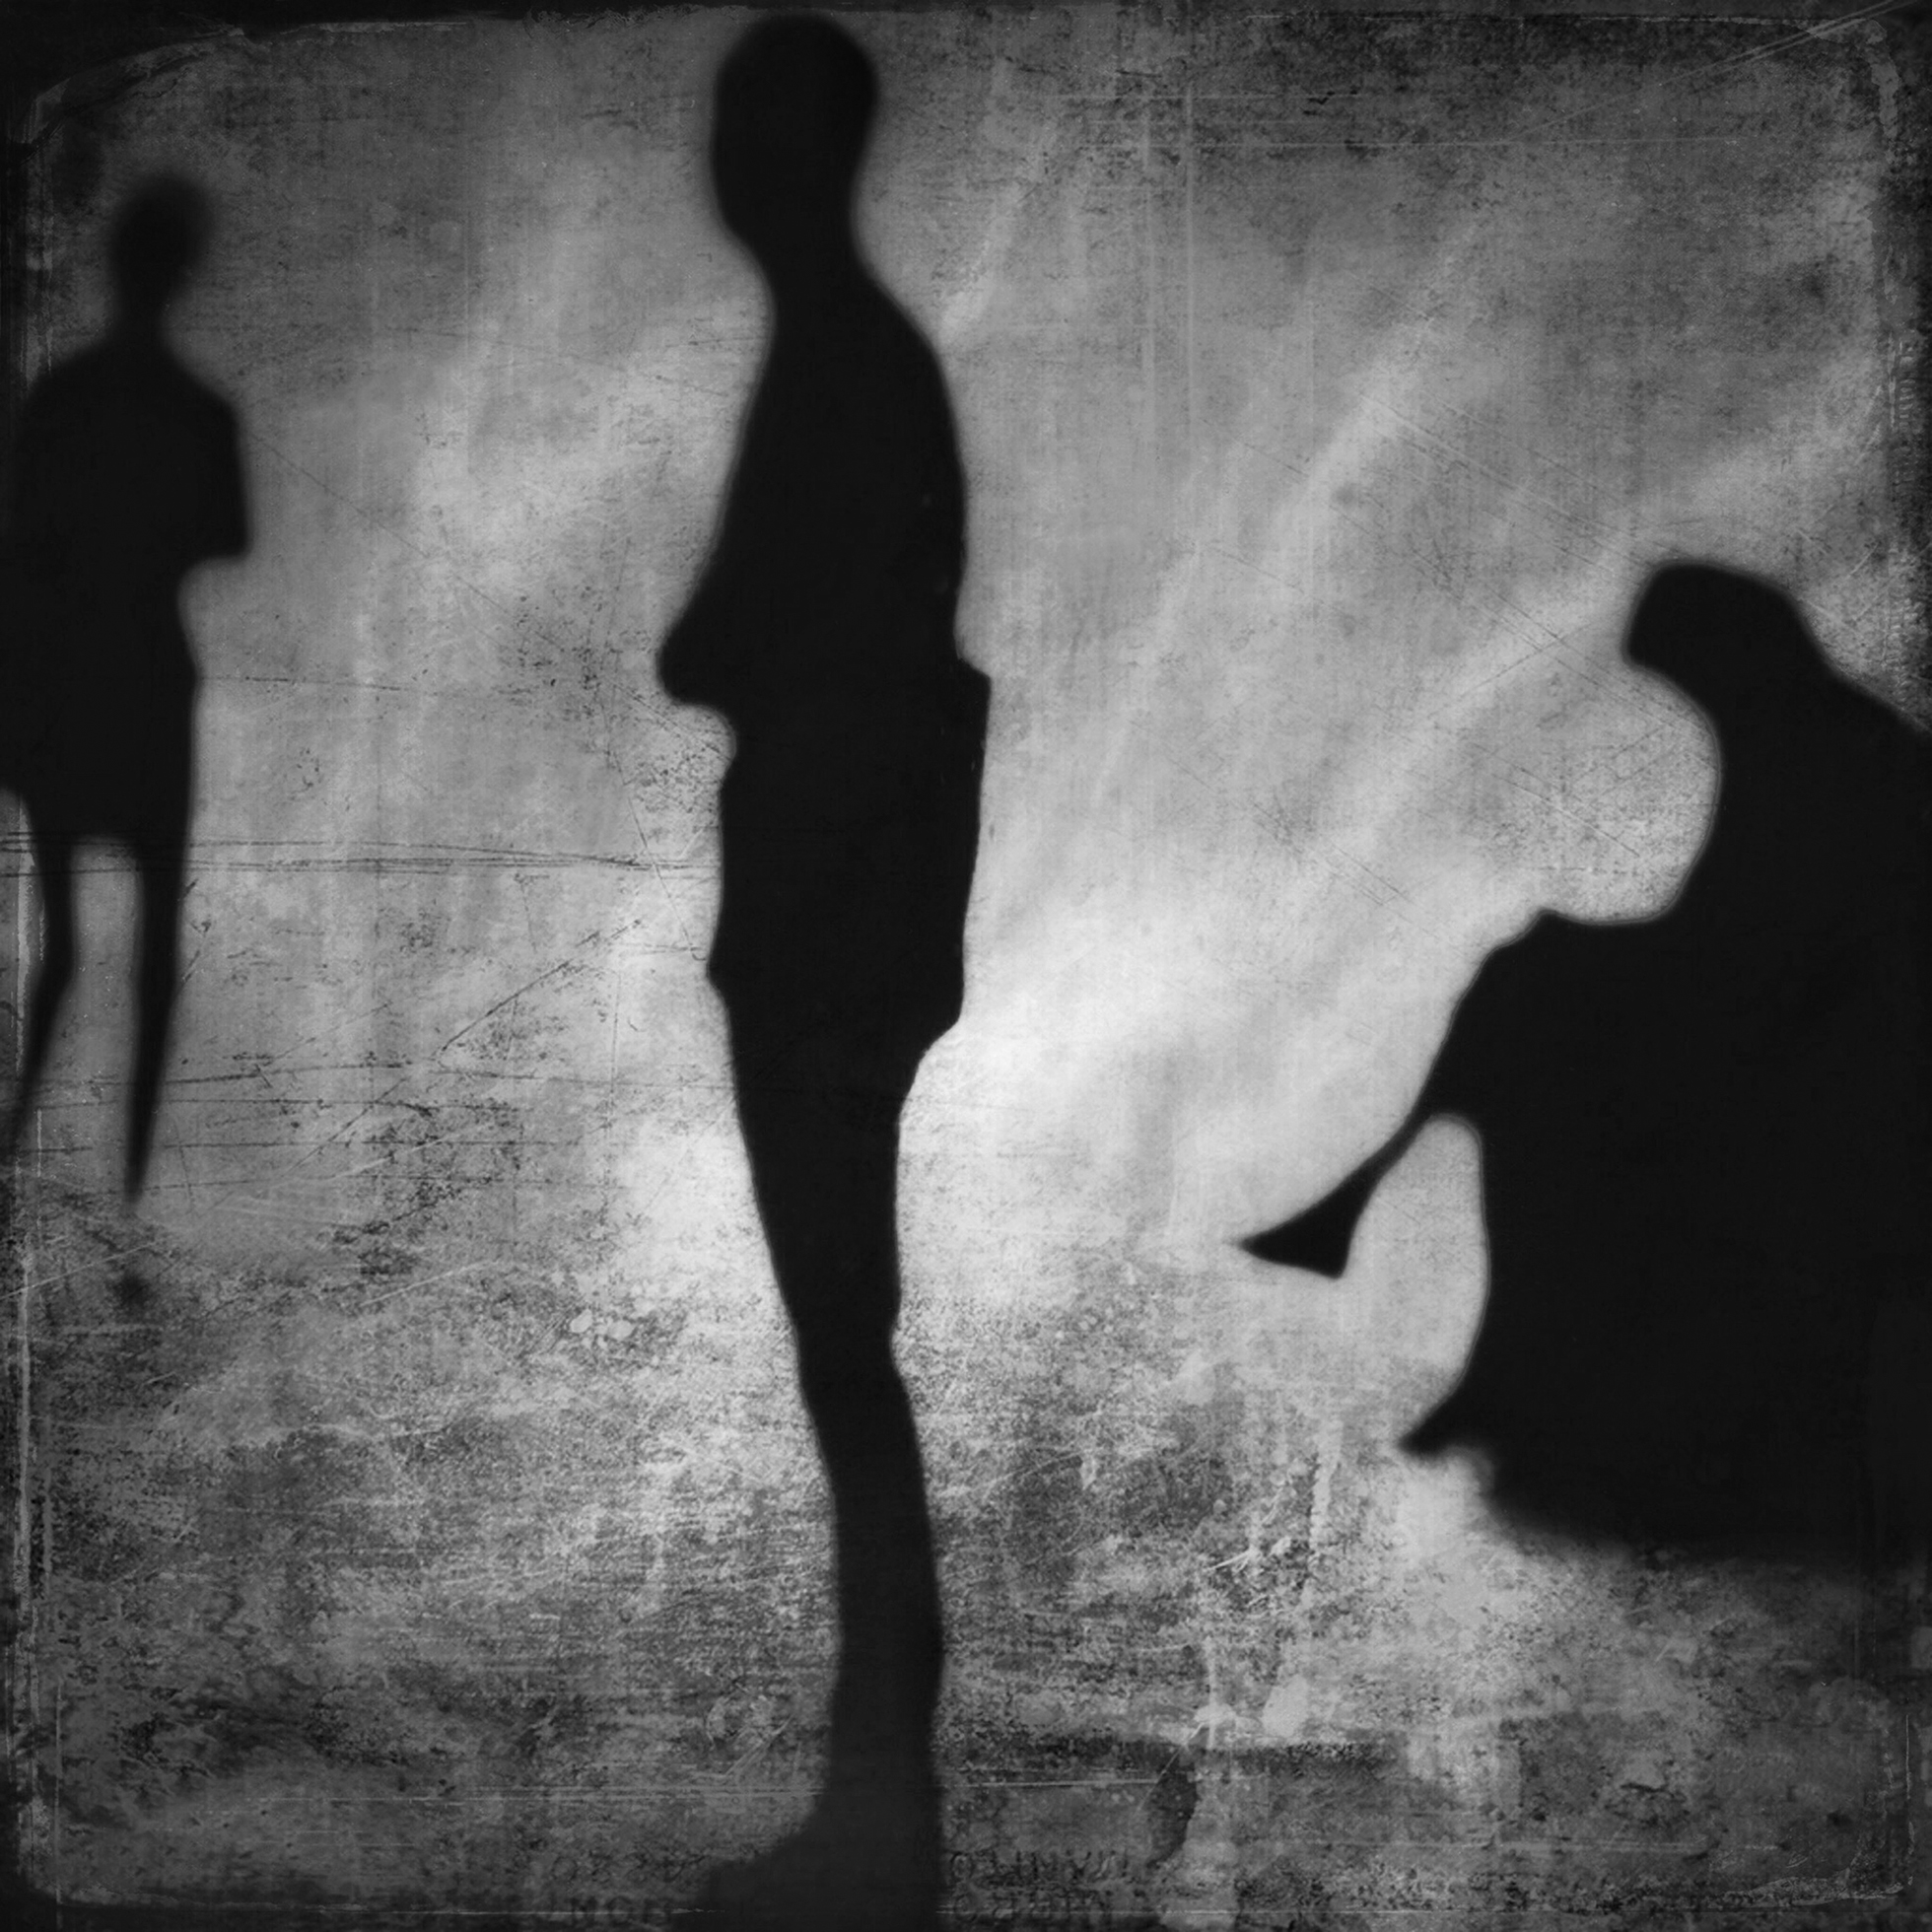 Three distorted, shadowy figures among a grunge background. The figure on the left is standing with their arms crossed. The figure in the center is standing in profile facing left. The figure on the right is sitting and looking down.